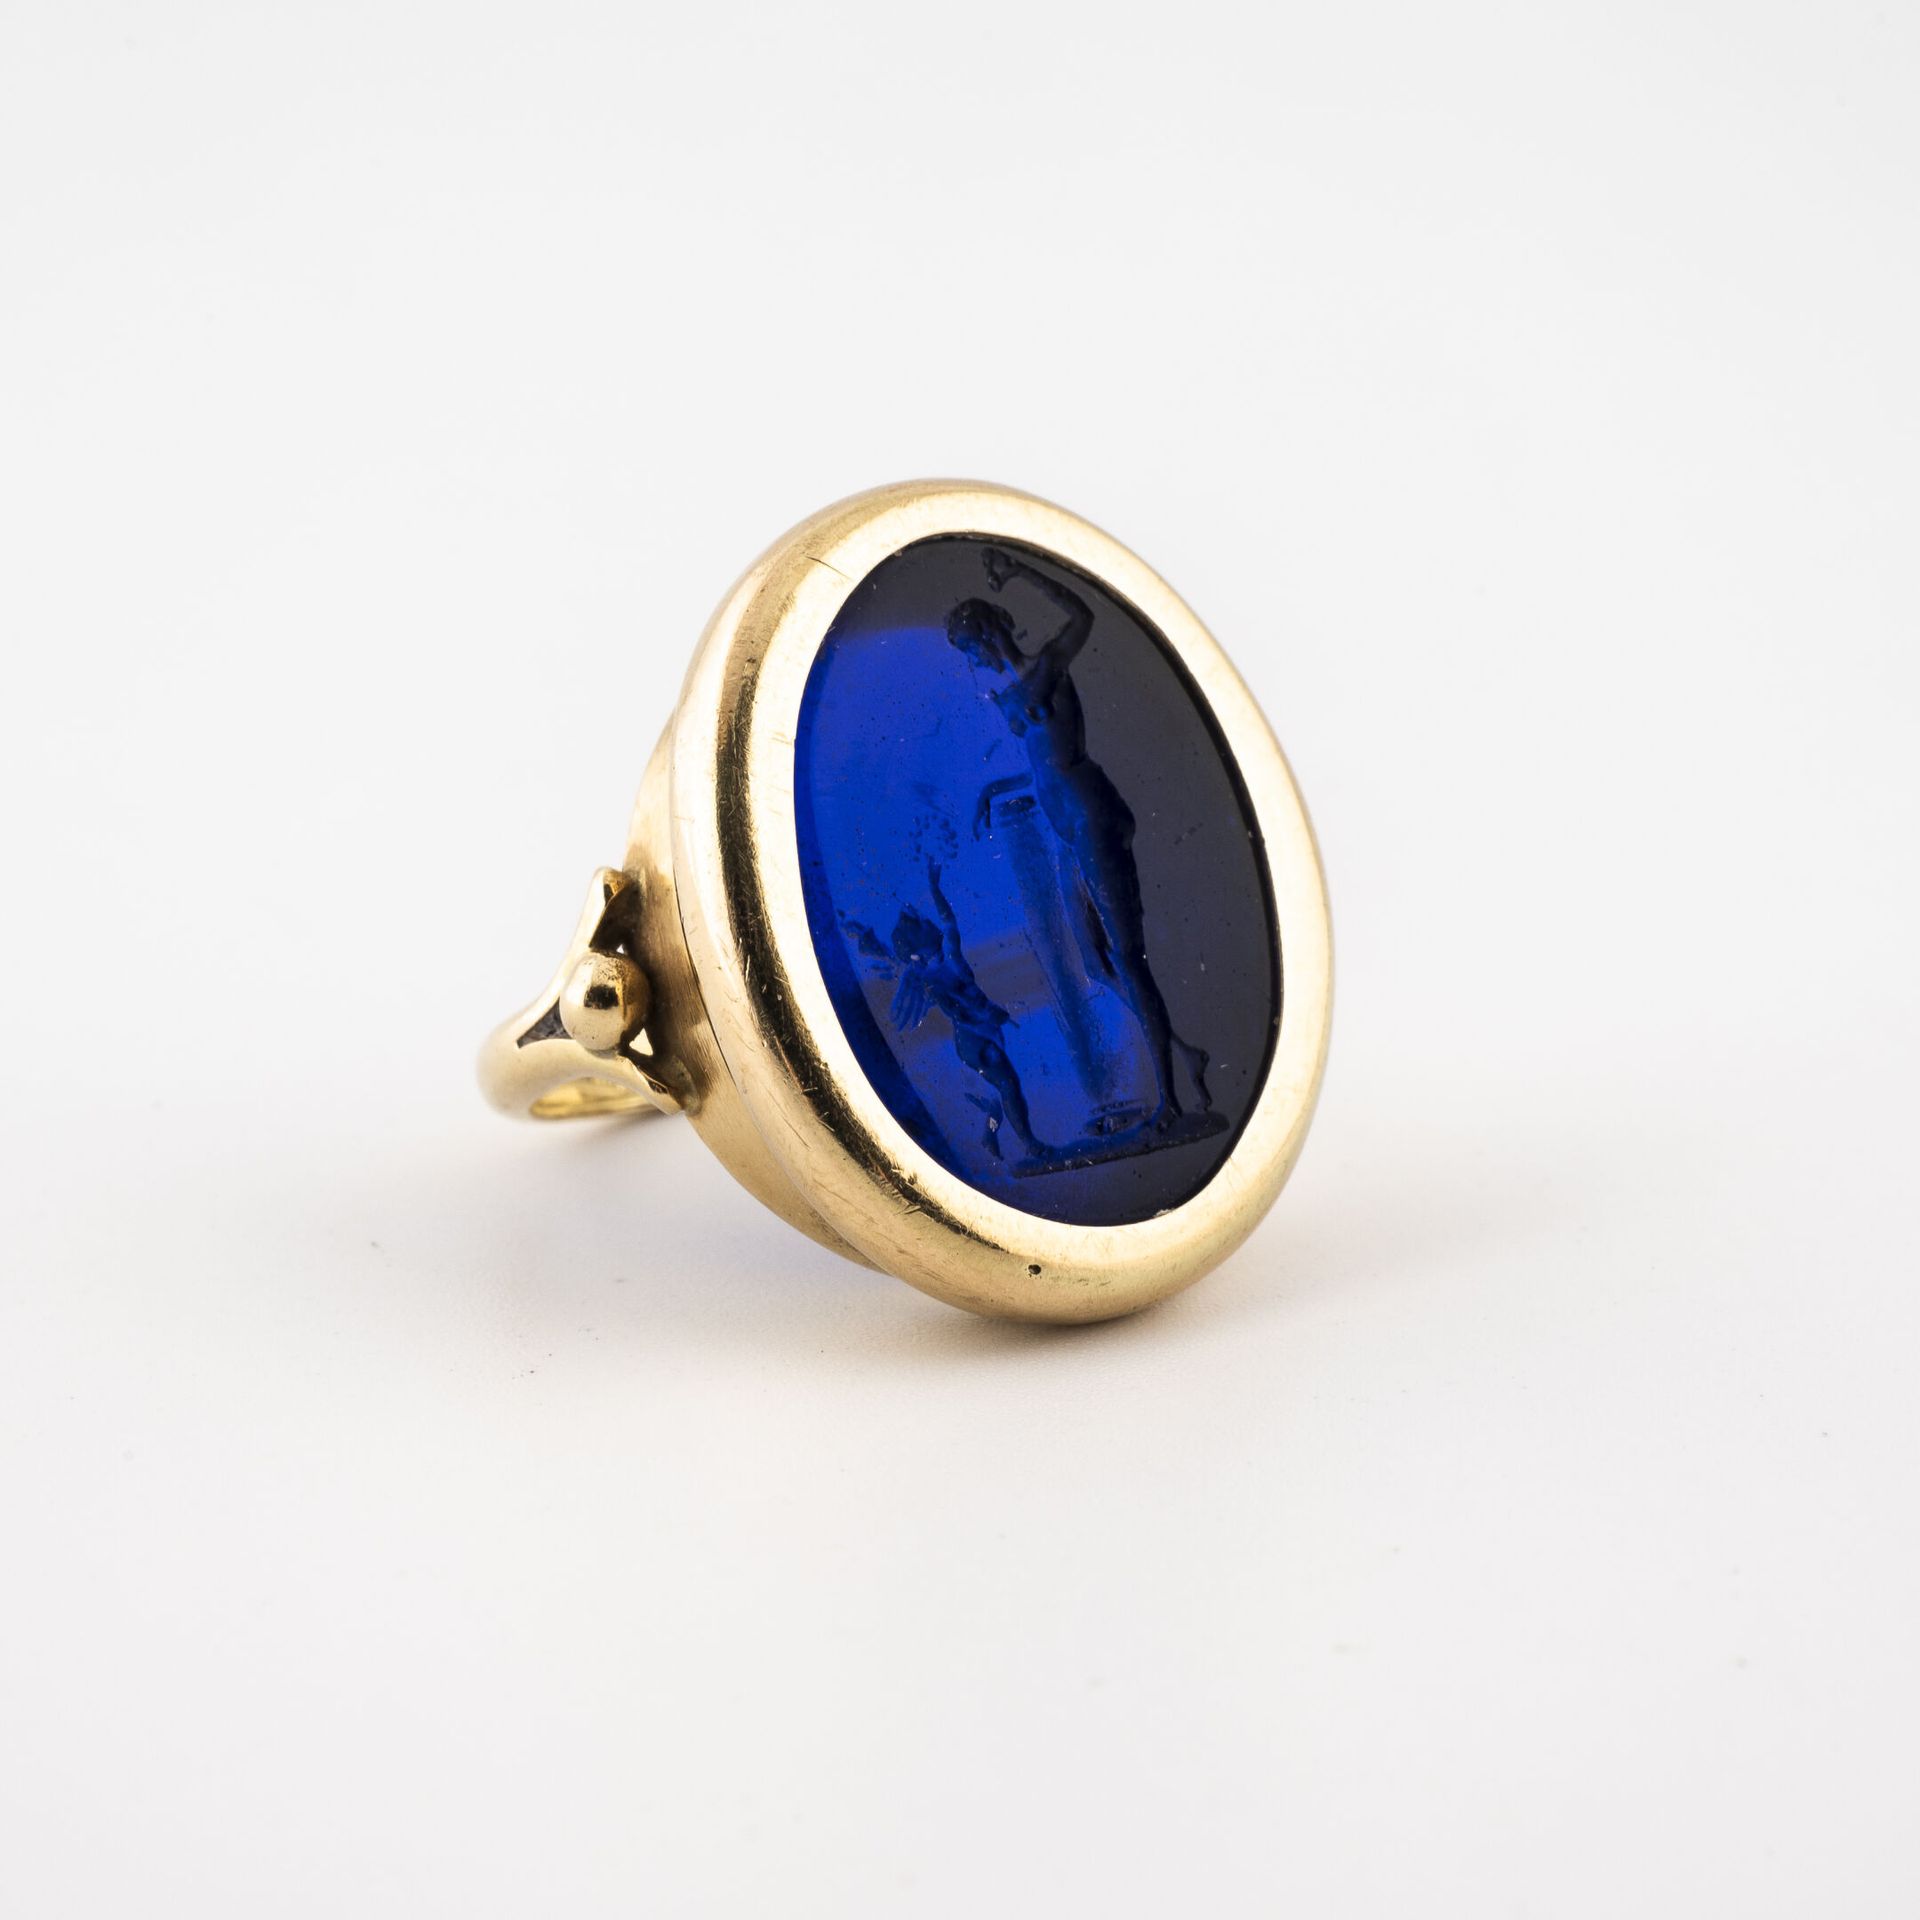 Null Yellow gold (750) ring with oval top set with a blue glass intaglio depicti&hellip;